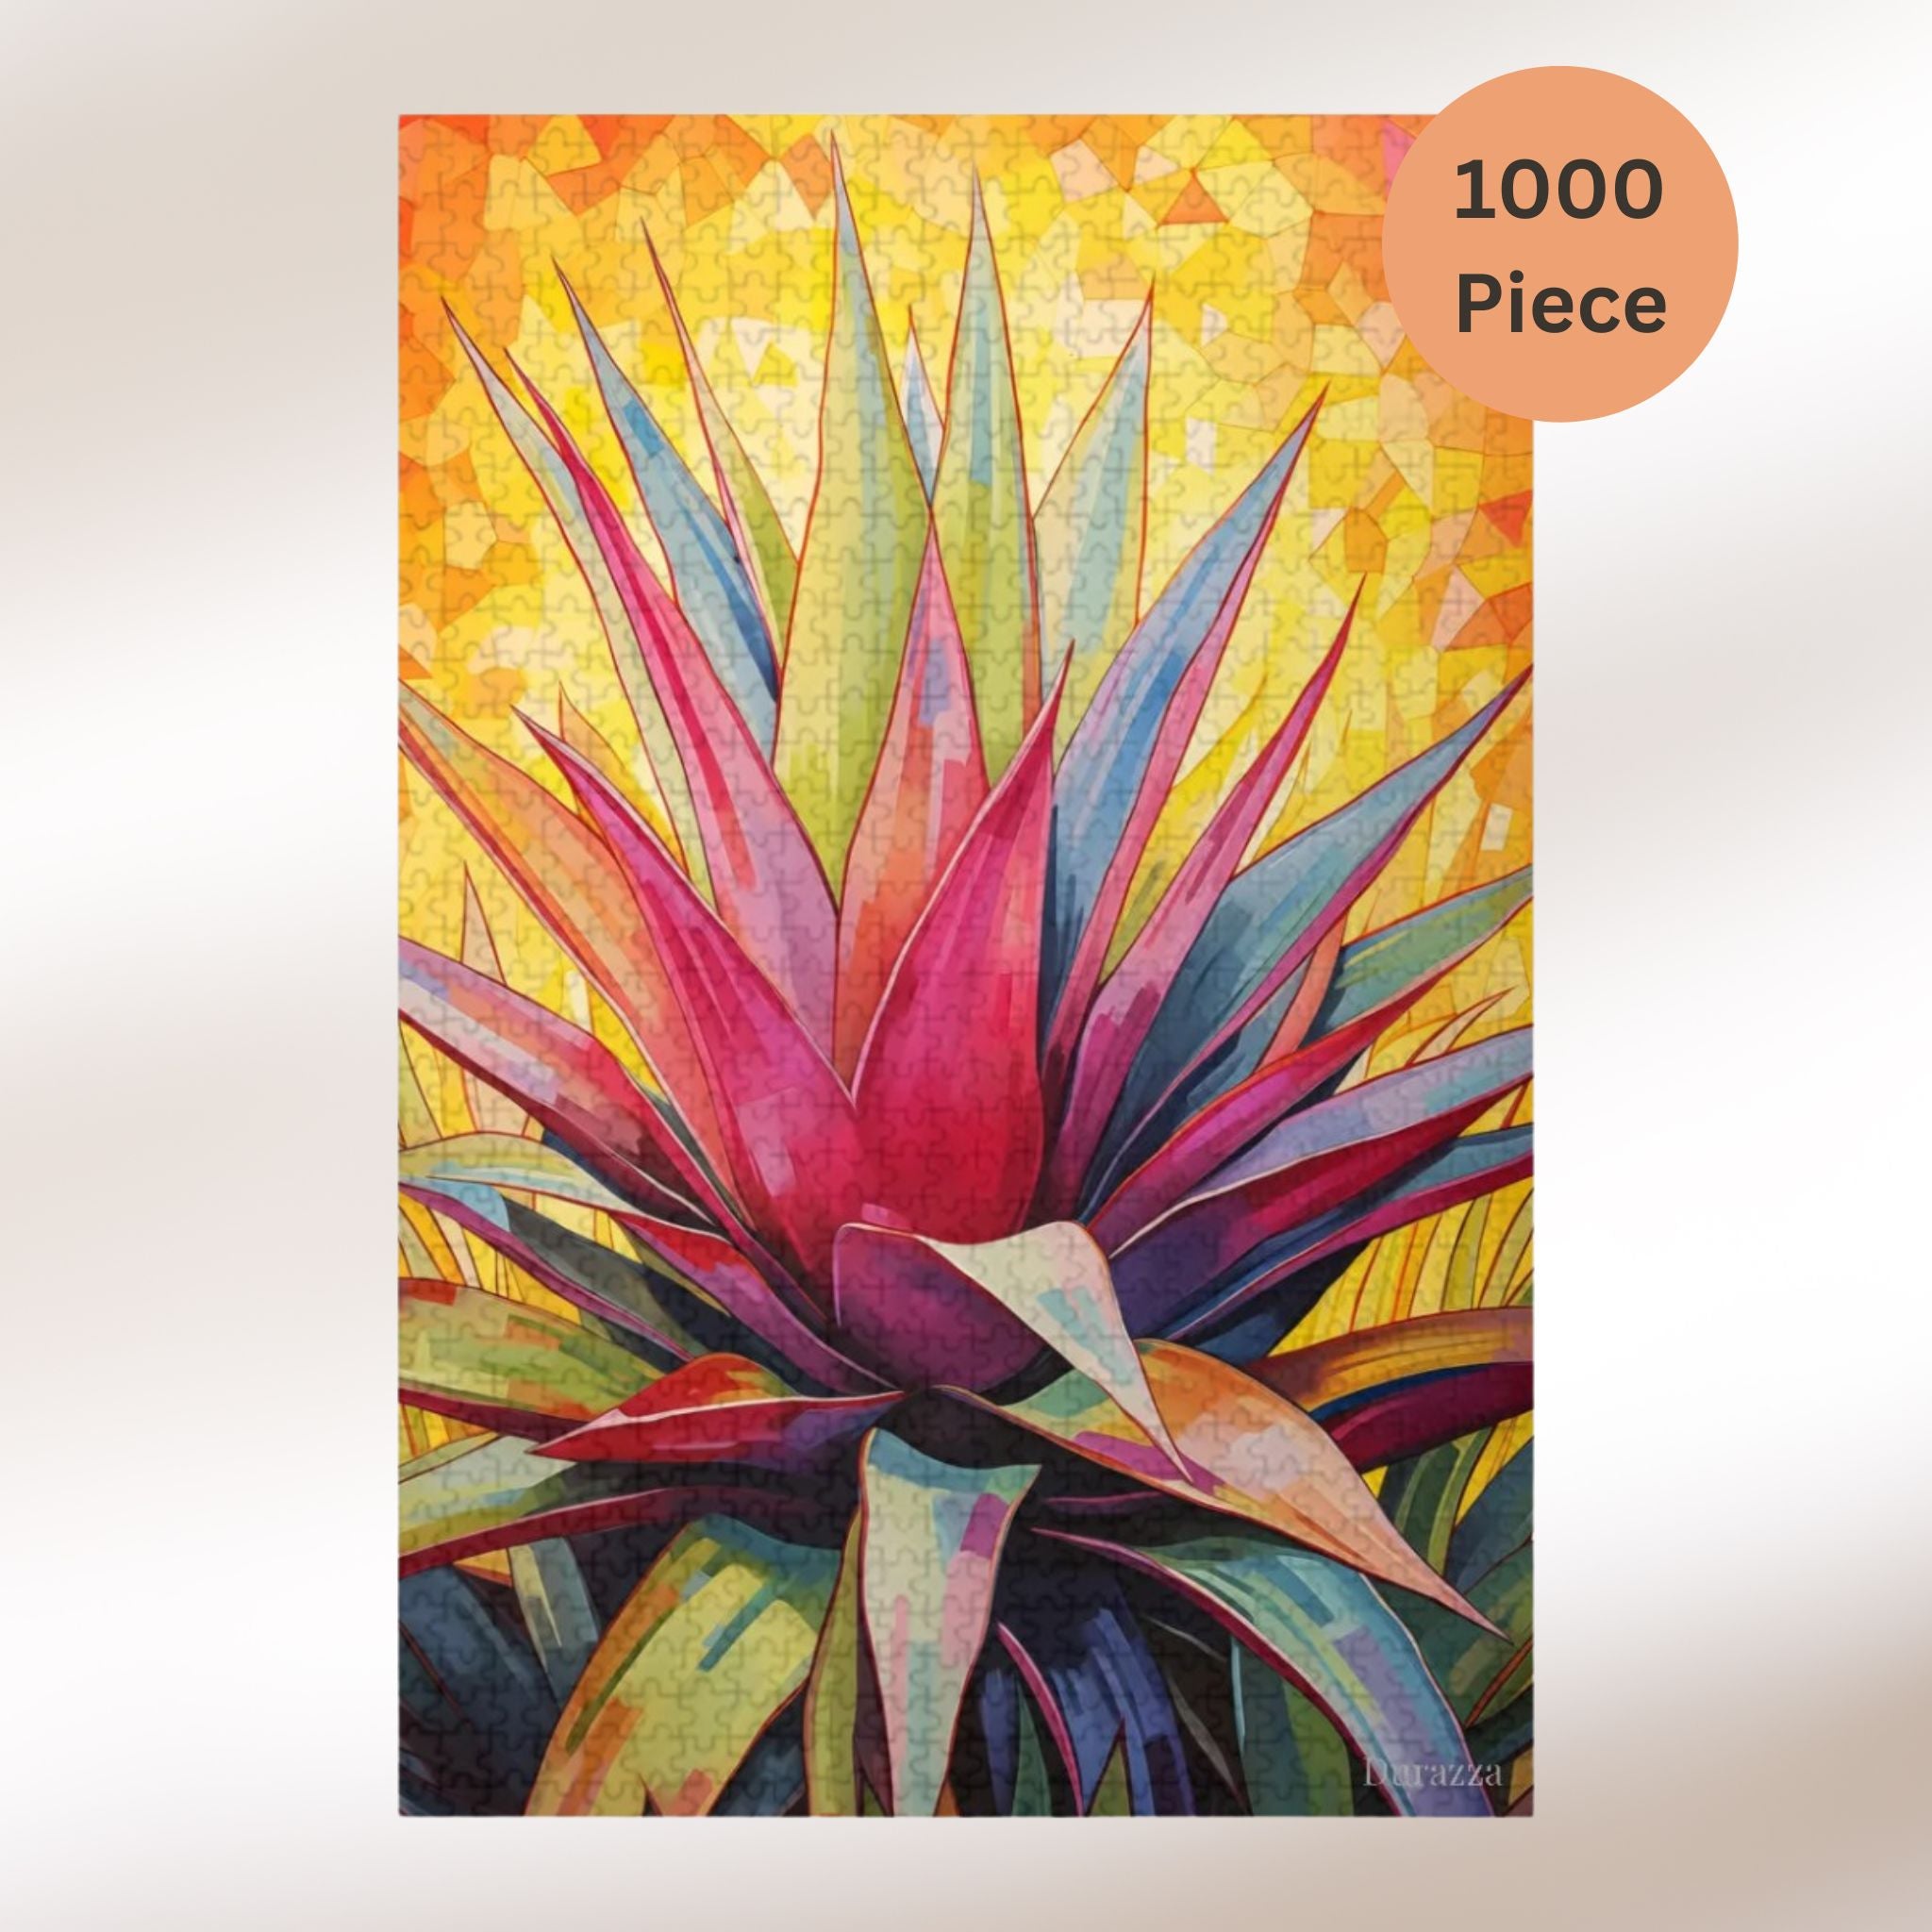 Desert Bloom Agave Jigsaw Puzzle: 500 or 1000 Piece Puzzle